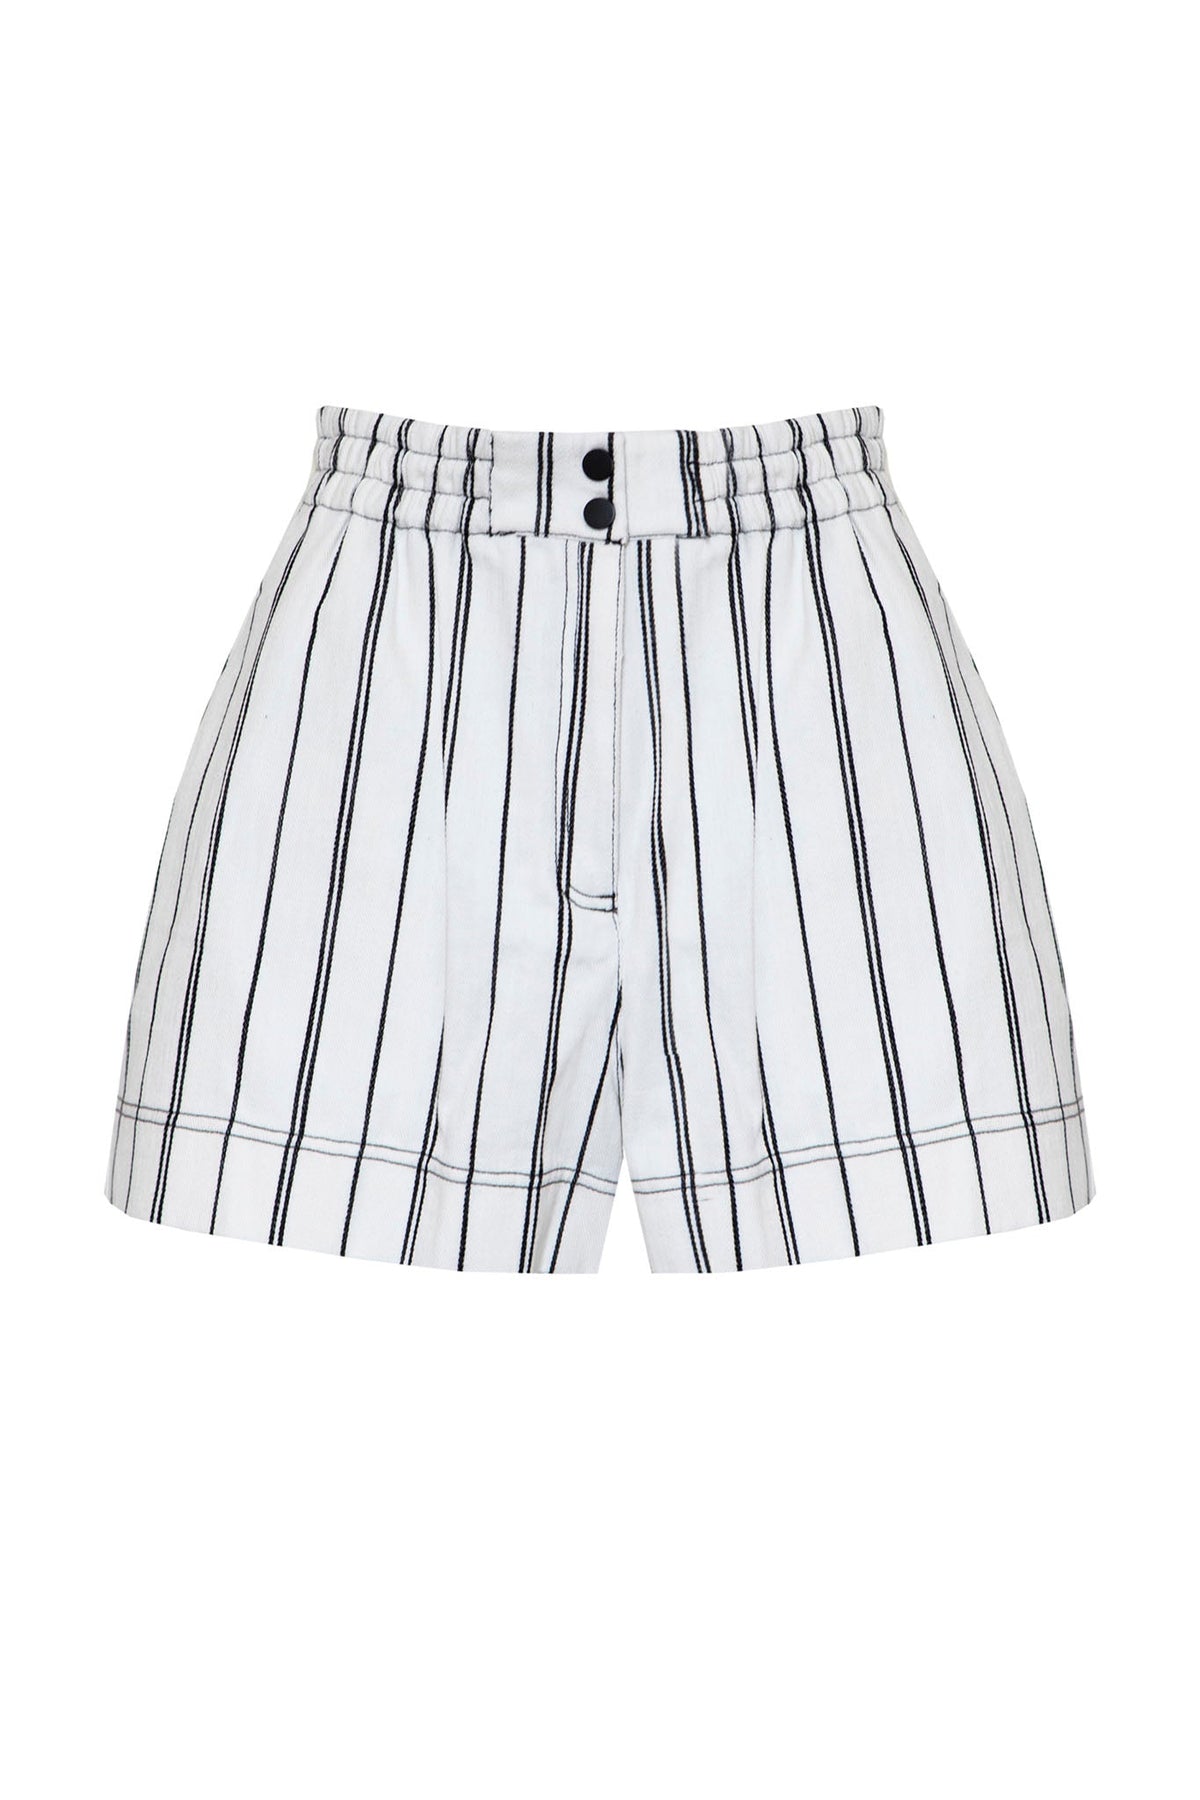 The Aspen Shorts have side pockets, an elastic waist with a snap closure and hidden zip fly.